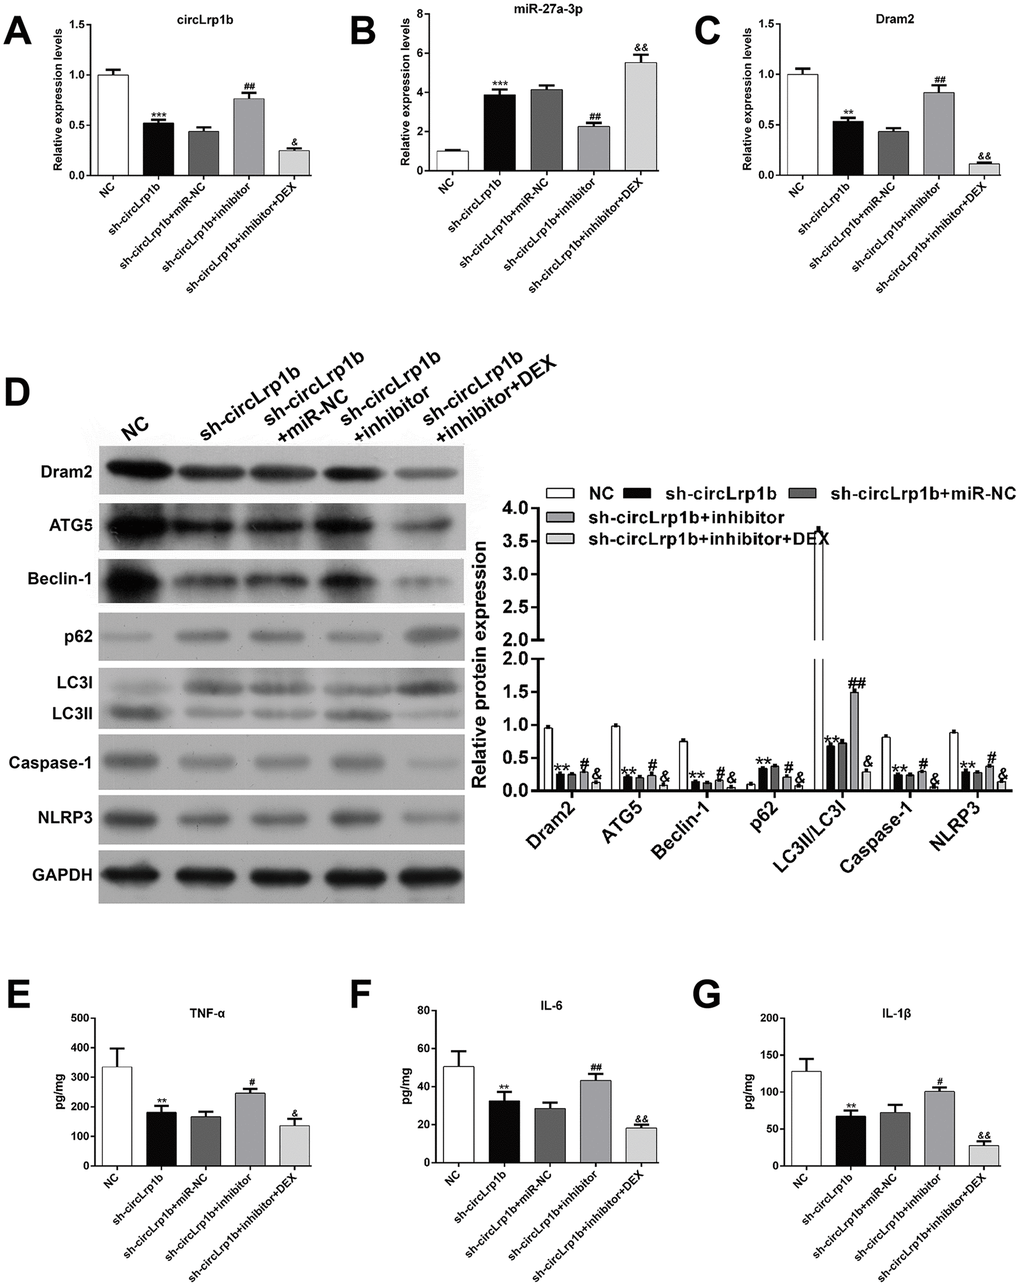 Inhibition of miR-27a-3p reverses the effects of circLrp1b knockdown in traumatic brain injury-induced autophagy and inflammation. Rats were administered intracerebroventricular injection of lentivirus vectors of sh-circLrp1b and miR-27a-3p inhibitor before traumatic brain injury (TBI) induction, followed by intraperitoneal injection of 20 μg/kg dexmedetomidine (DEX). Expression levels of circLrp1b (A), miR-27a-3p (B), and Dram2 (C), as determined using real-time quantitative reverse transcriptase polymerase chain reaction. (D) Expression levels of the proteins Dram2, ATG5, Beclin-1, p62, LC3 I/II, caspase-1, and NLRP3, as measured by western blot. Quantitative analysis of TNF-α (E), IL-6 (F), and IL-1β (G) production in the hippocampal tissues by using enzyme-linked immunosorbent assay (ELISA). Each experiment was repeated 6 times. **p p p p p p 